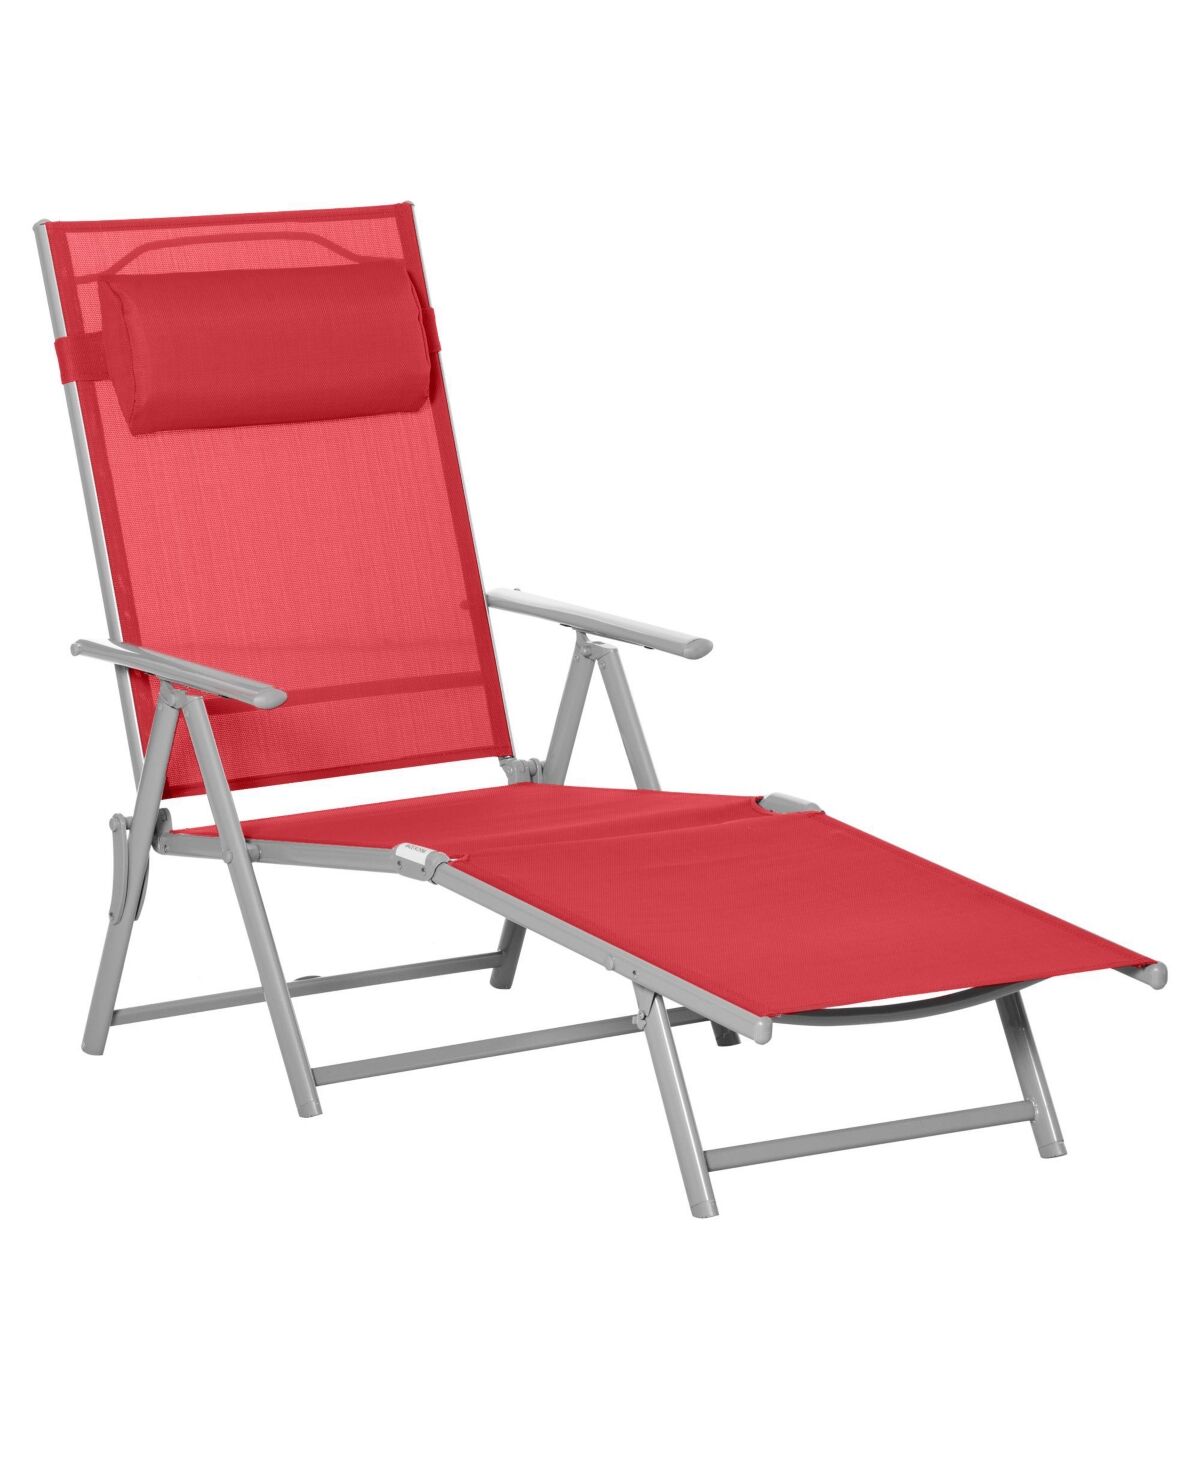 Outsunny Outdoor Folding Chaise Lounge Chair, Portable Lightweight Reclining Sun Lounger with 7-Position Adjustable Backrest & Pillow for Patio, Deck,